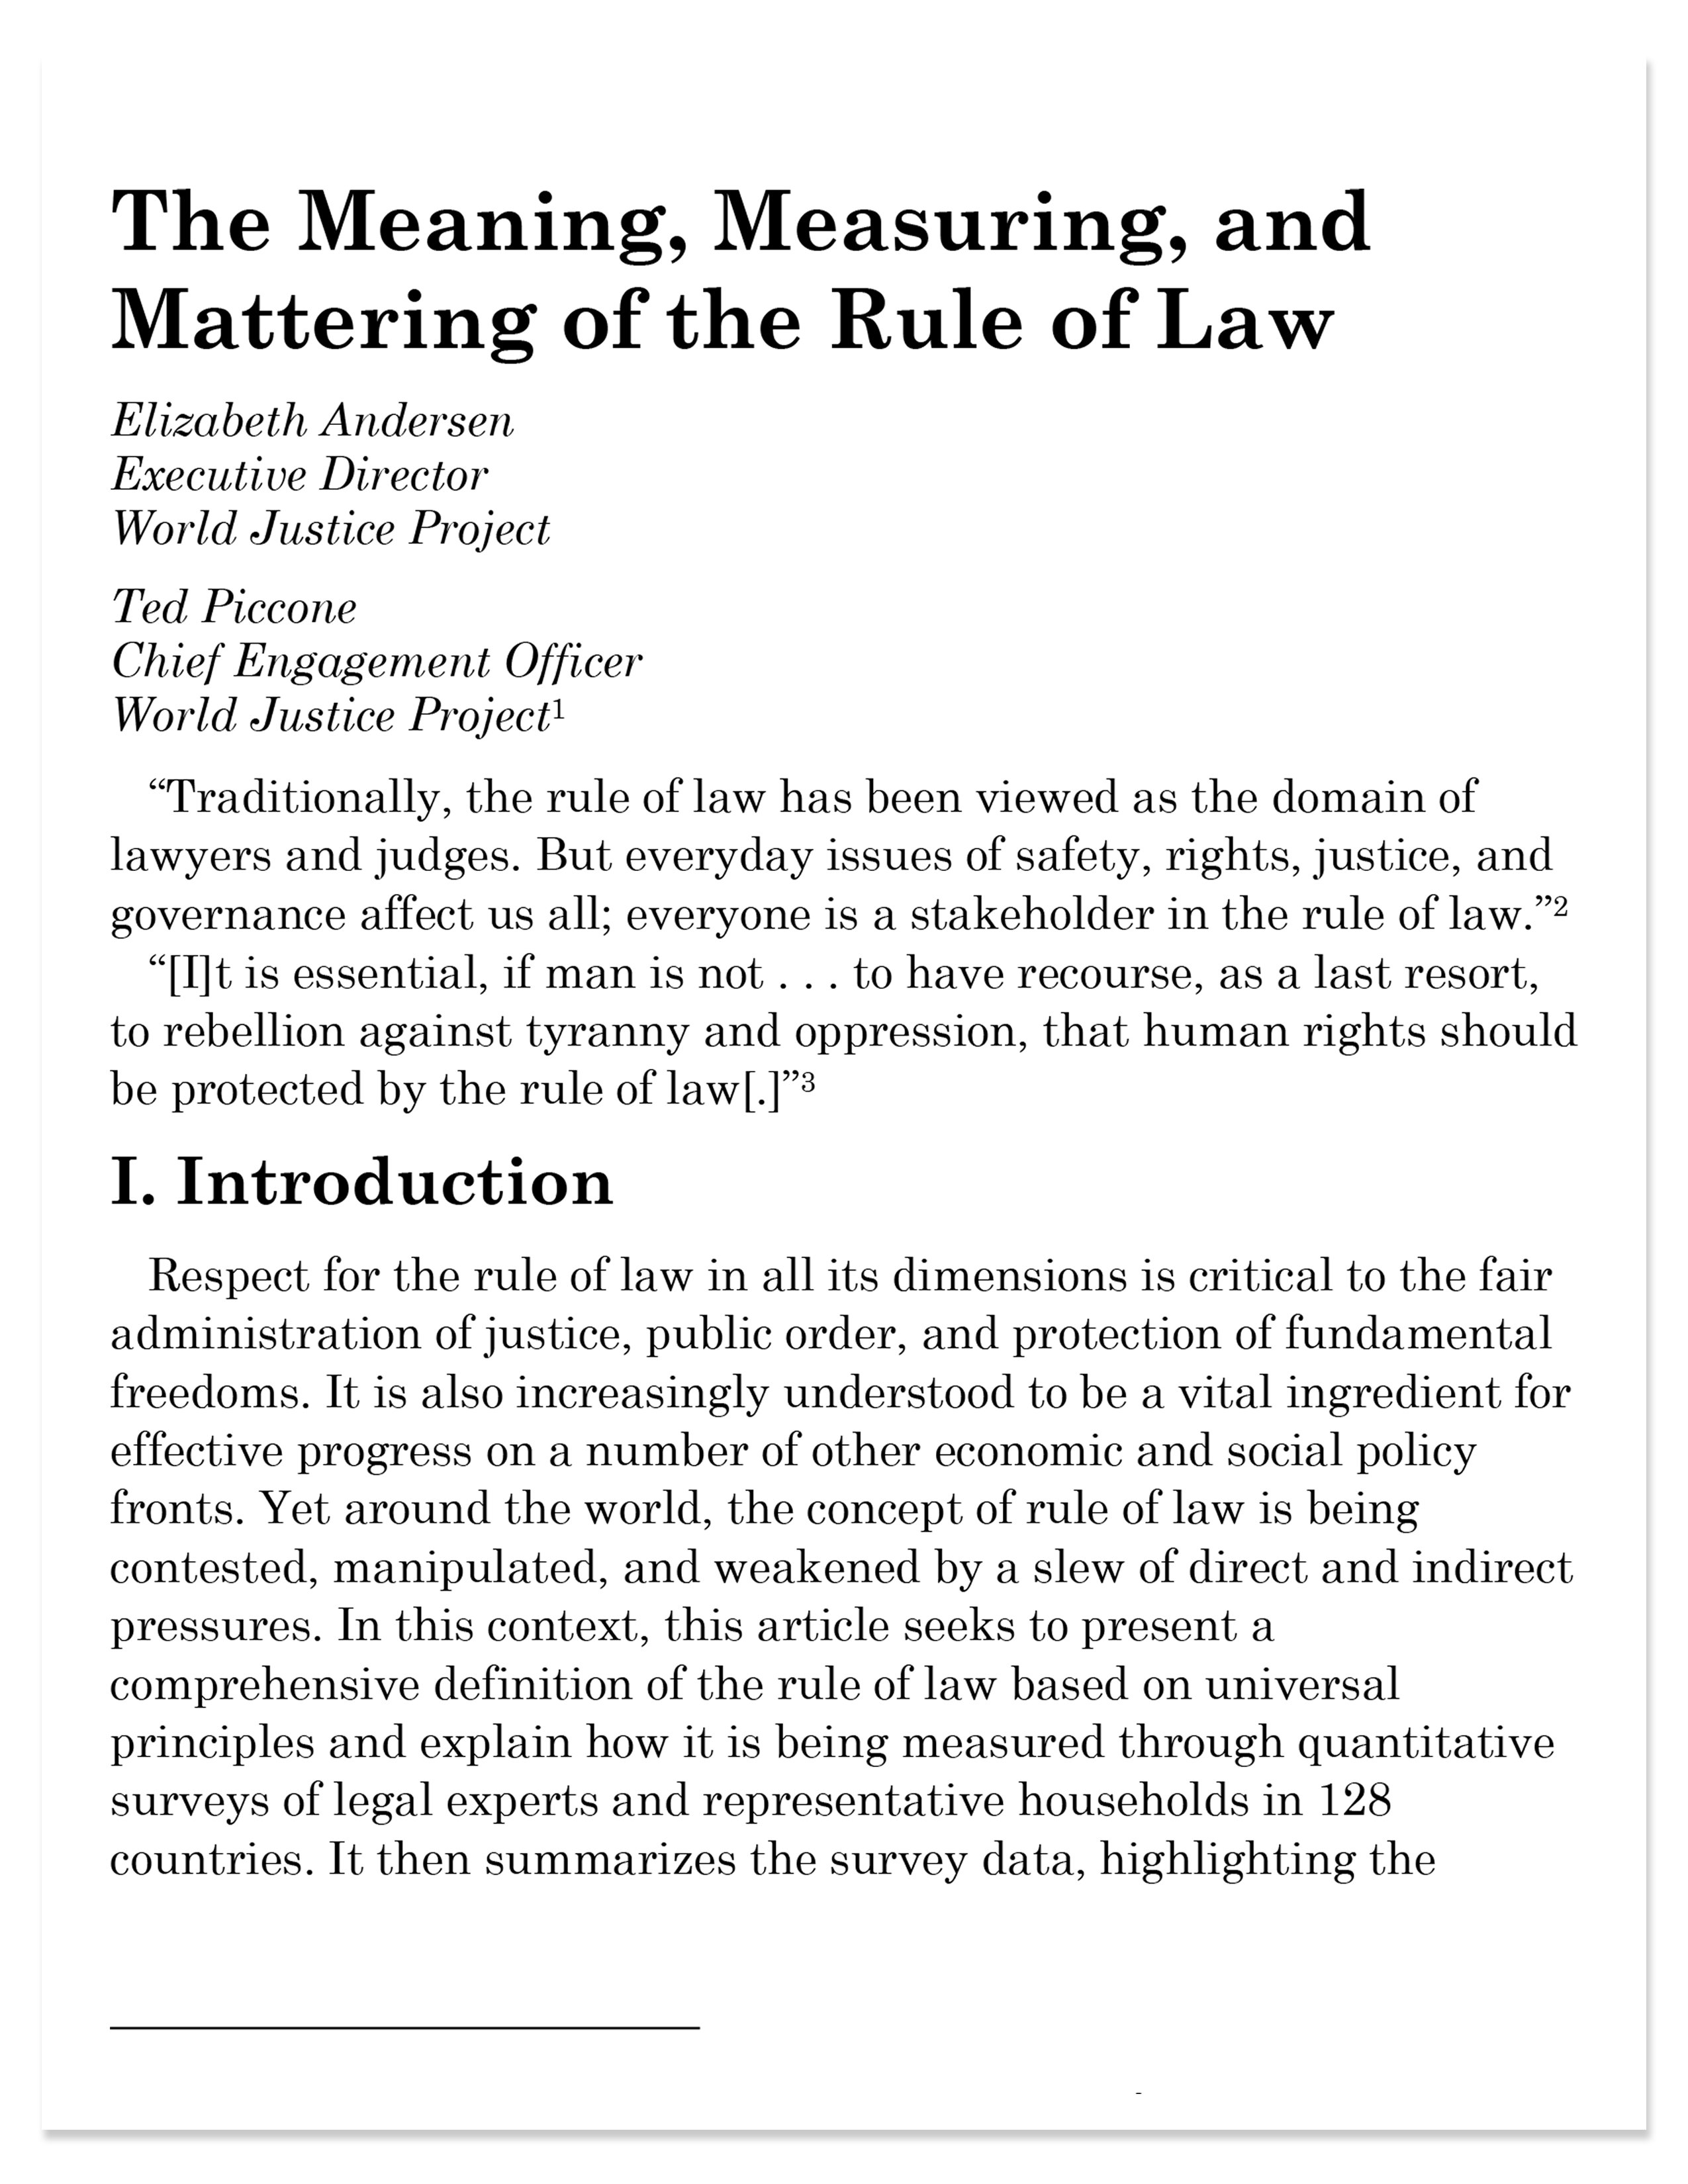 WJP Featured in Department of Justice Journal of Federal Law and